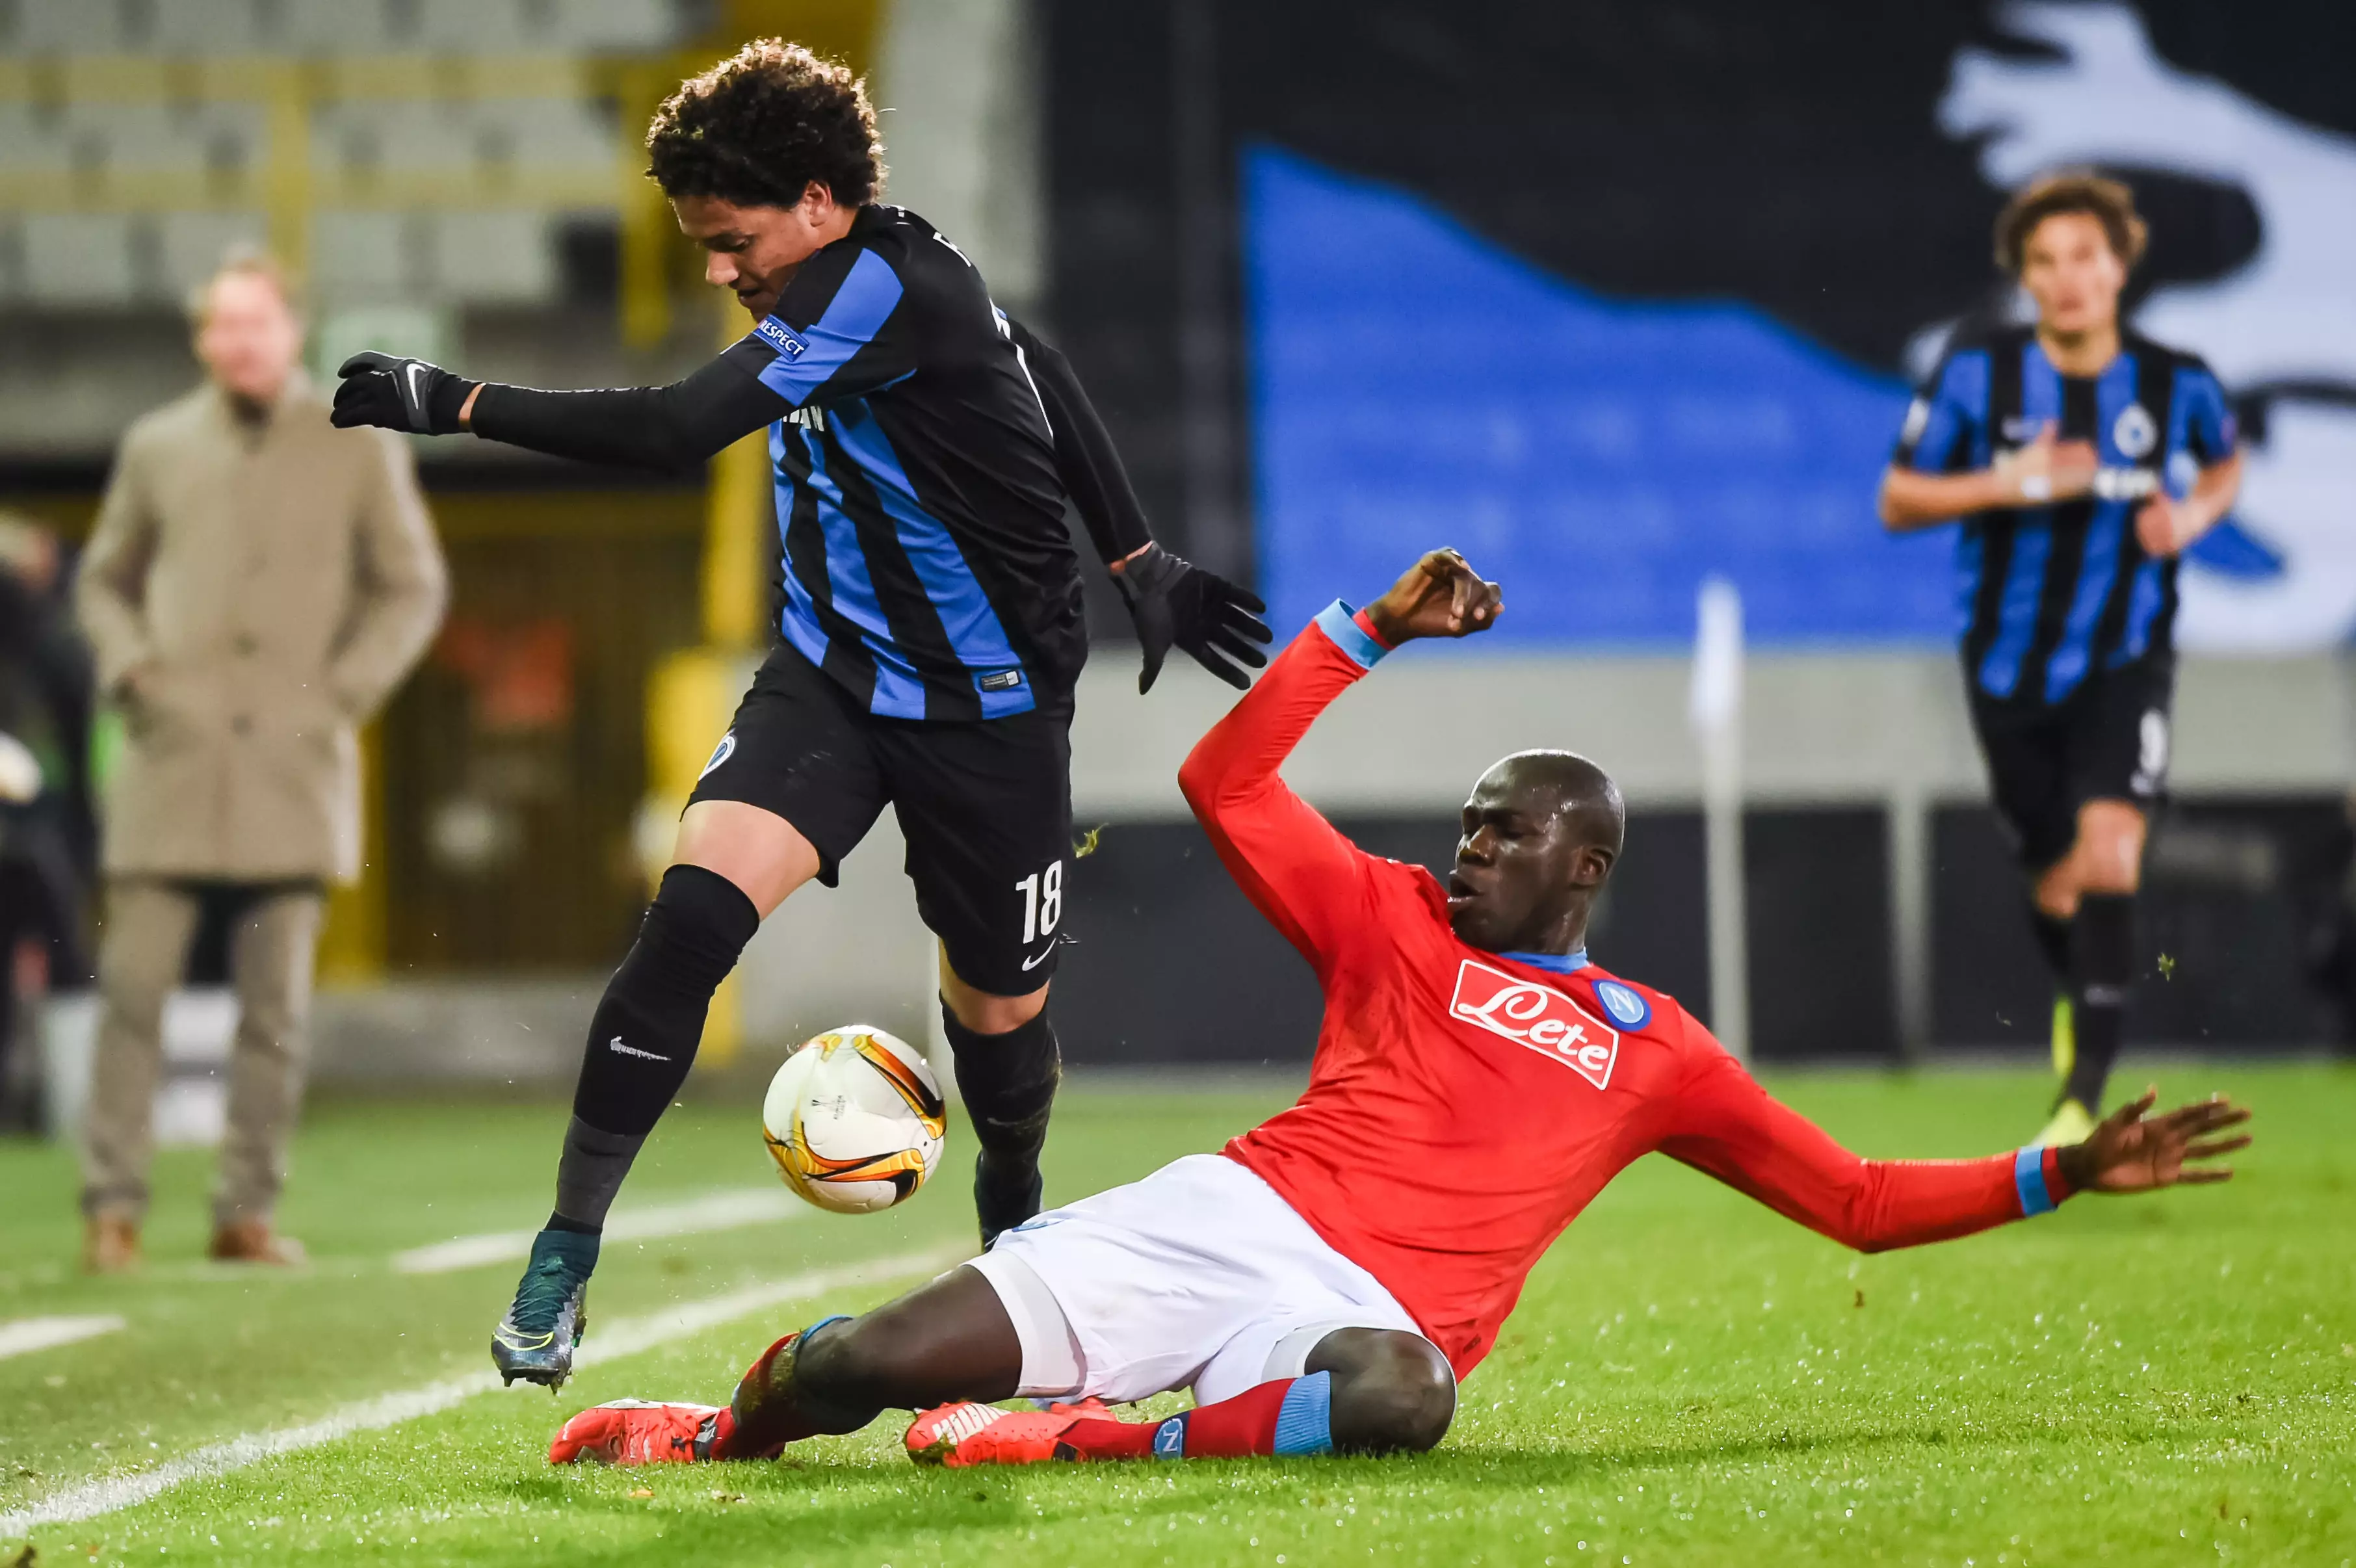 The Napoli defender looks unlikely to leave this window. Image: PA Images